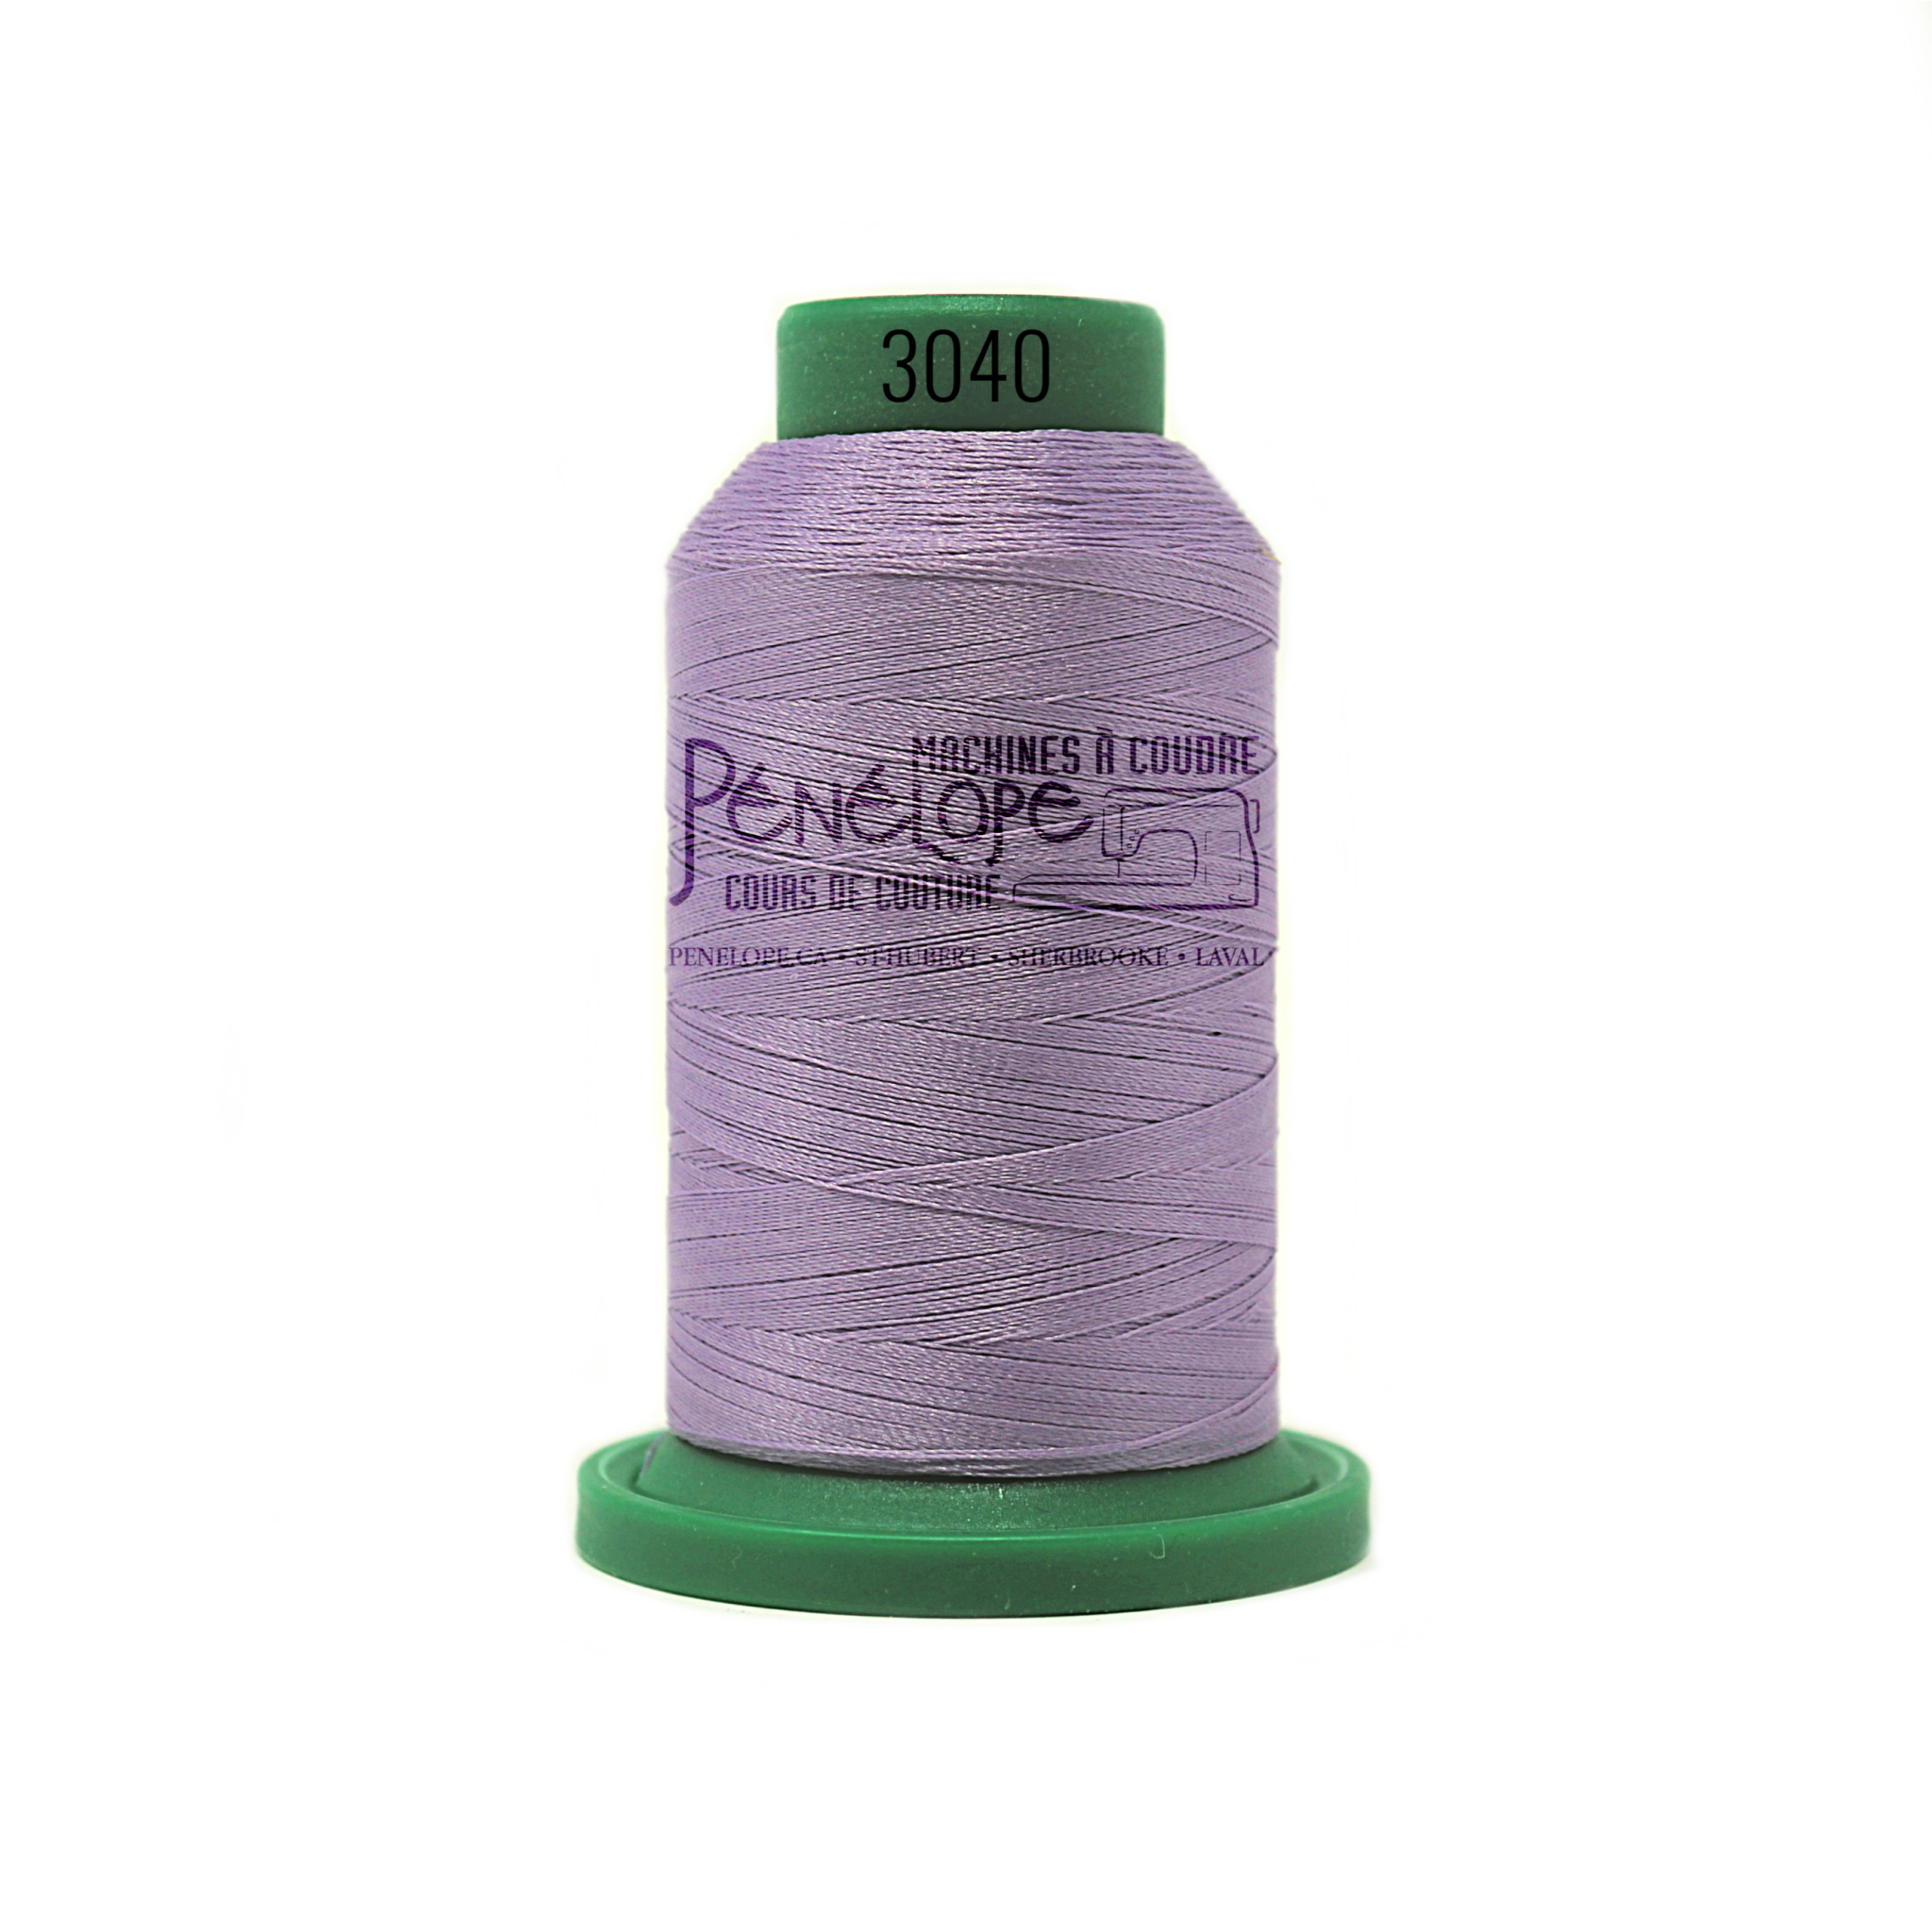 Isacord Isacord sewing and embroidery thread 3040